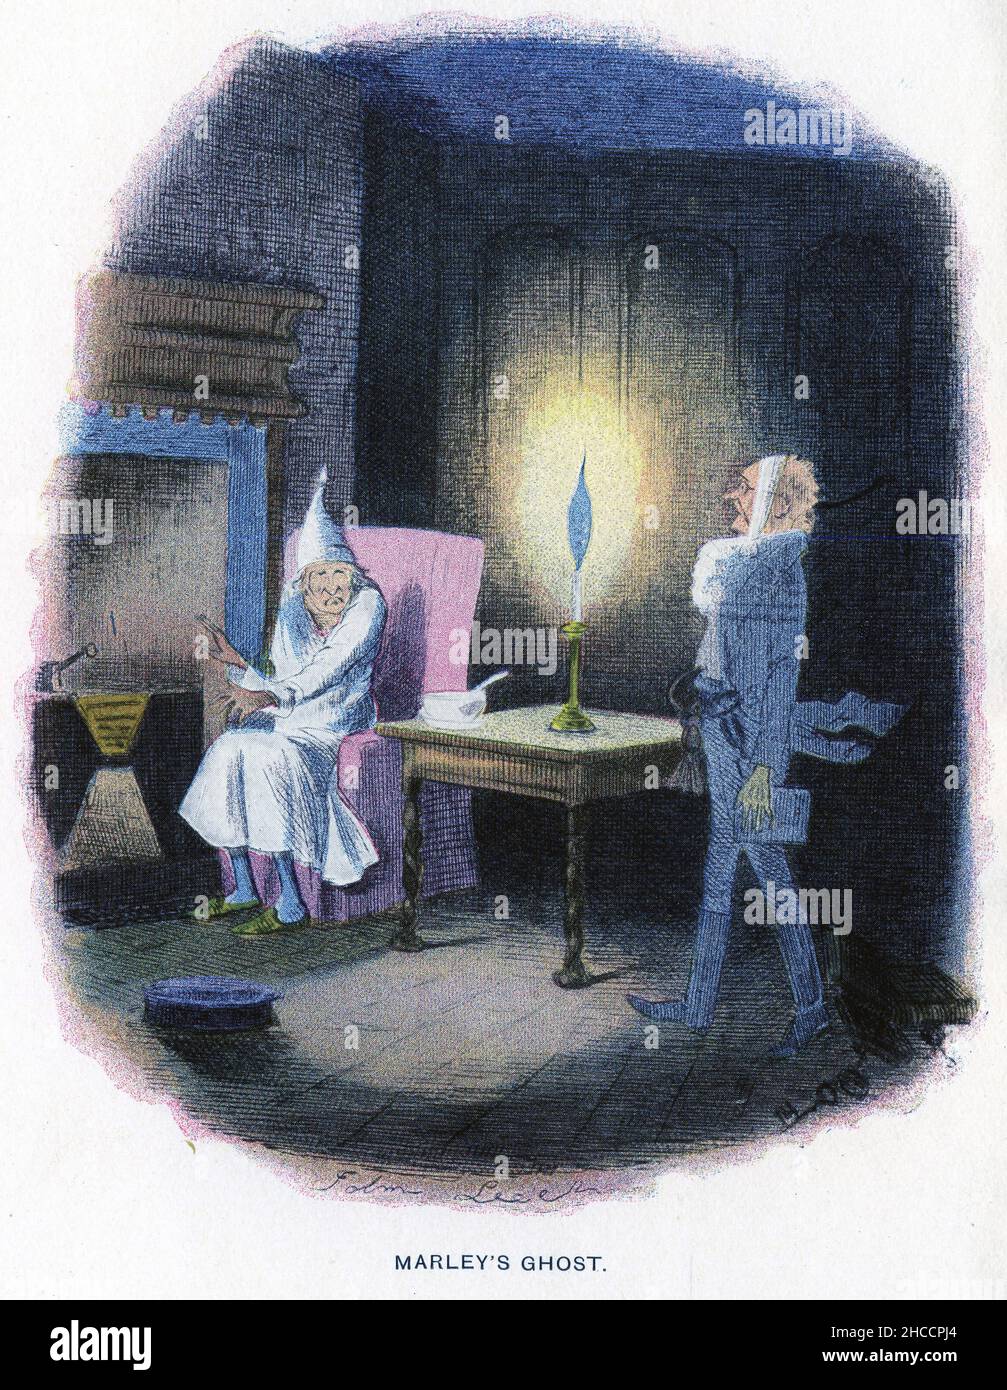 Engraving of Marley's ghost, a scene from a Victorian era book by Charles Dickens, published circa 1908 Stock Photo